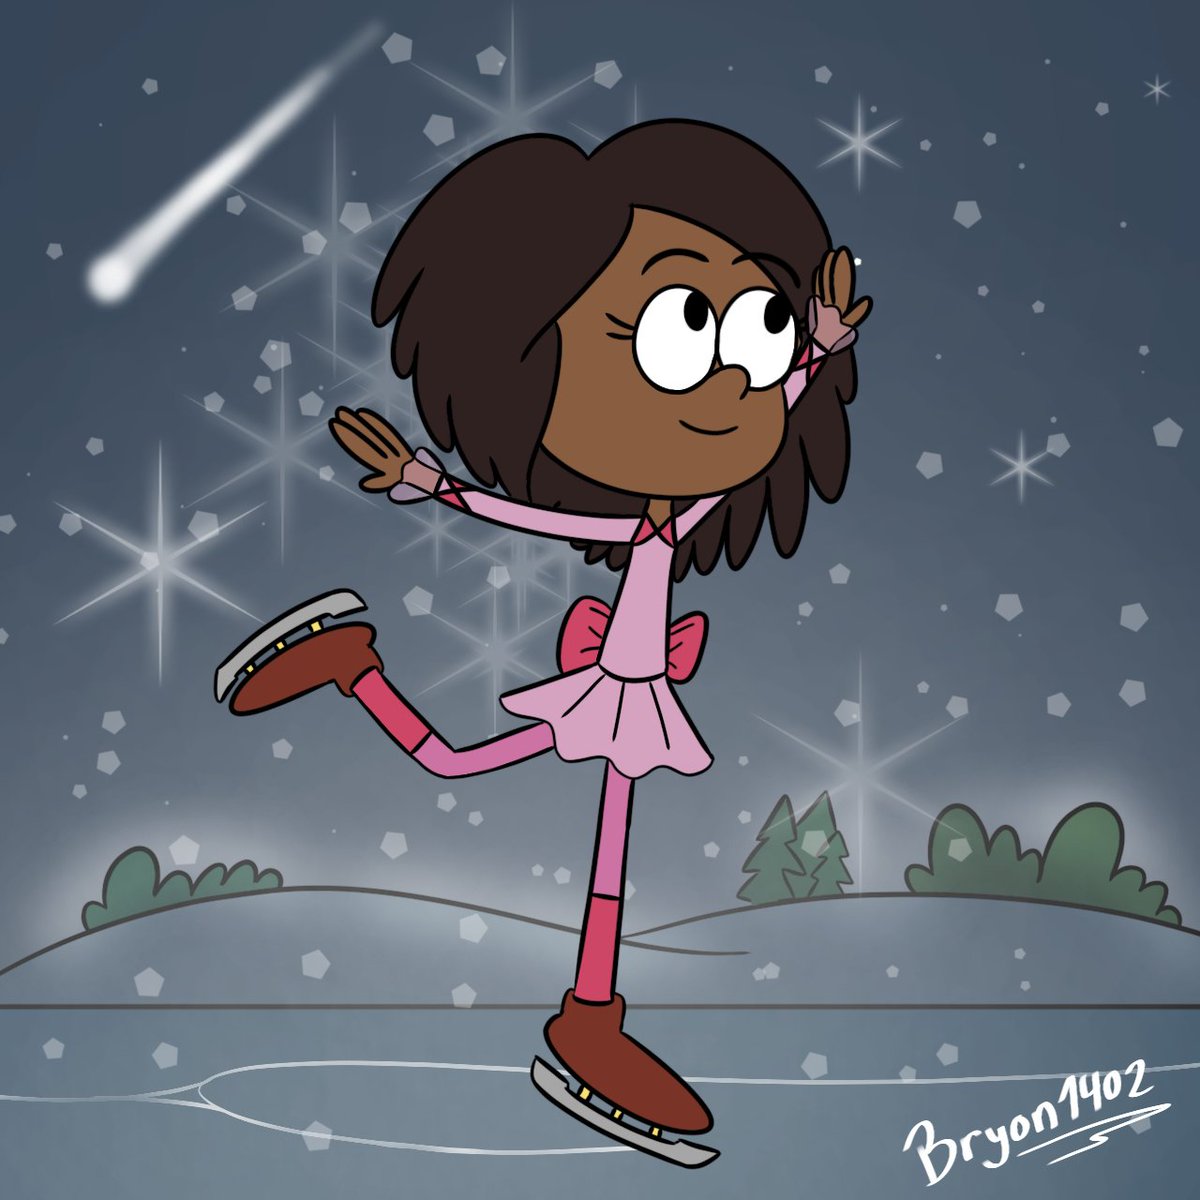 Charlie Uggo snow skiing, back drawing

#Fanart #myart #snow #TheReallyLoudHouse #Nickelodeon #TheLoudHouse #TLH